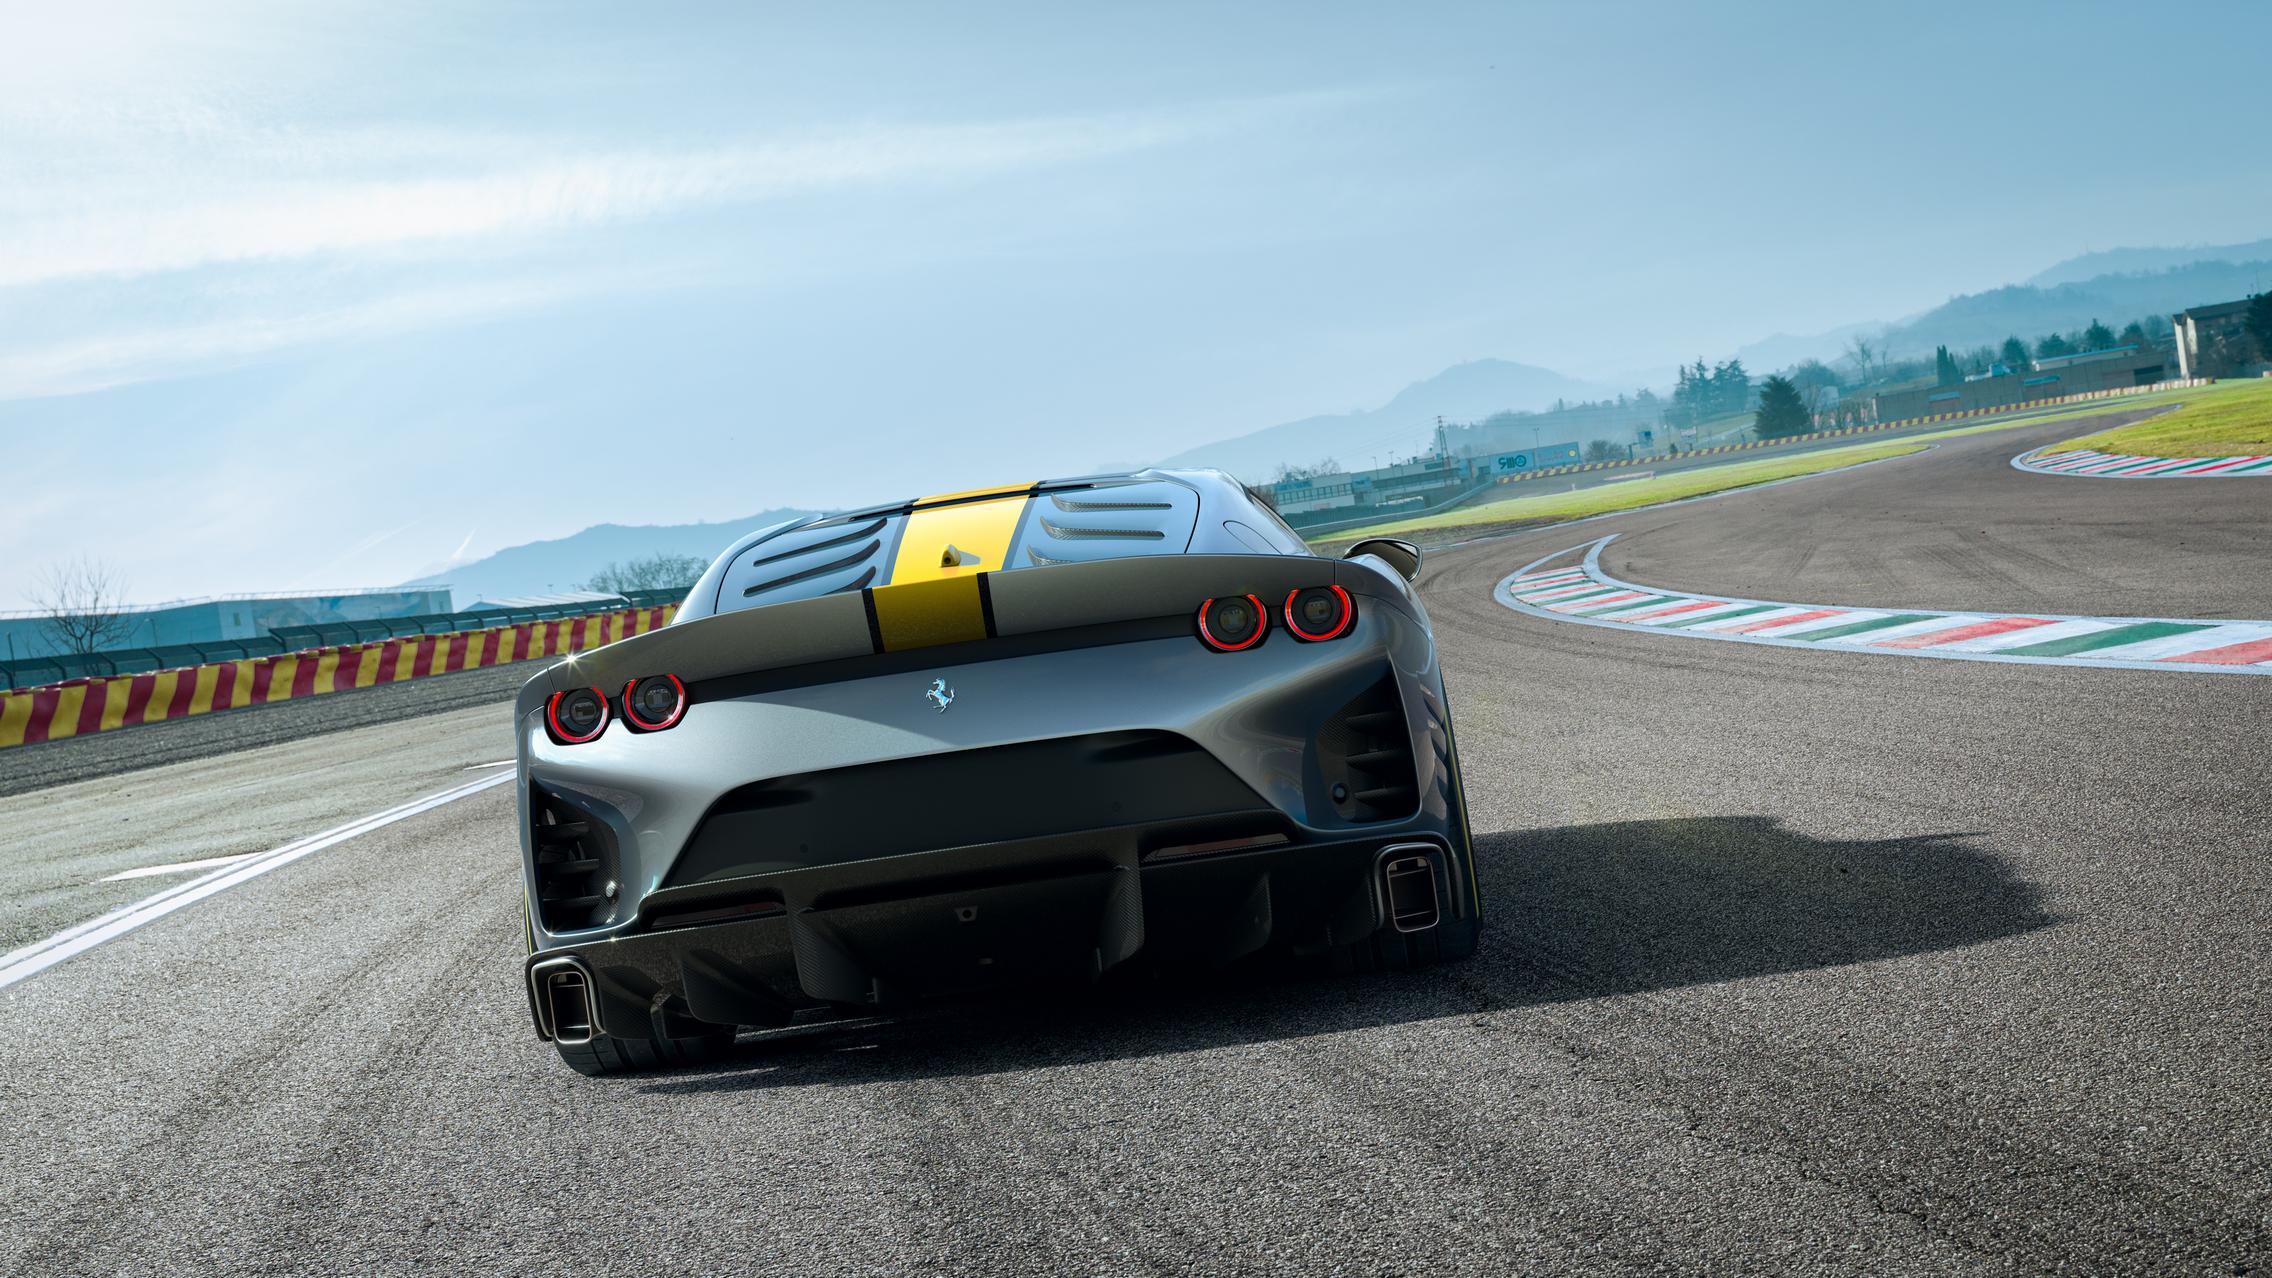 Photos Revealed: Limited Edition Ferrari 812 Competizione of 999 Worldwide